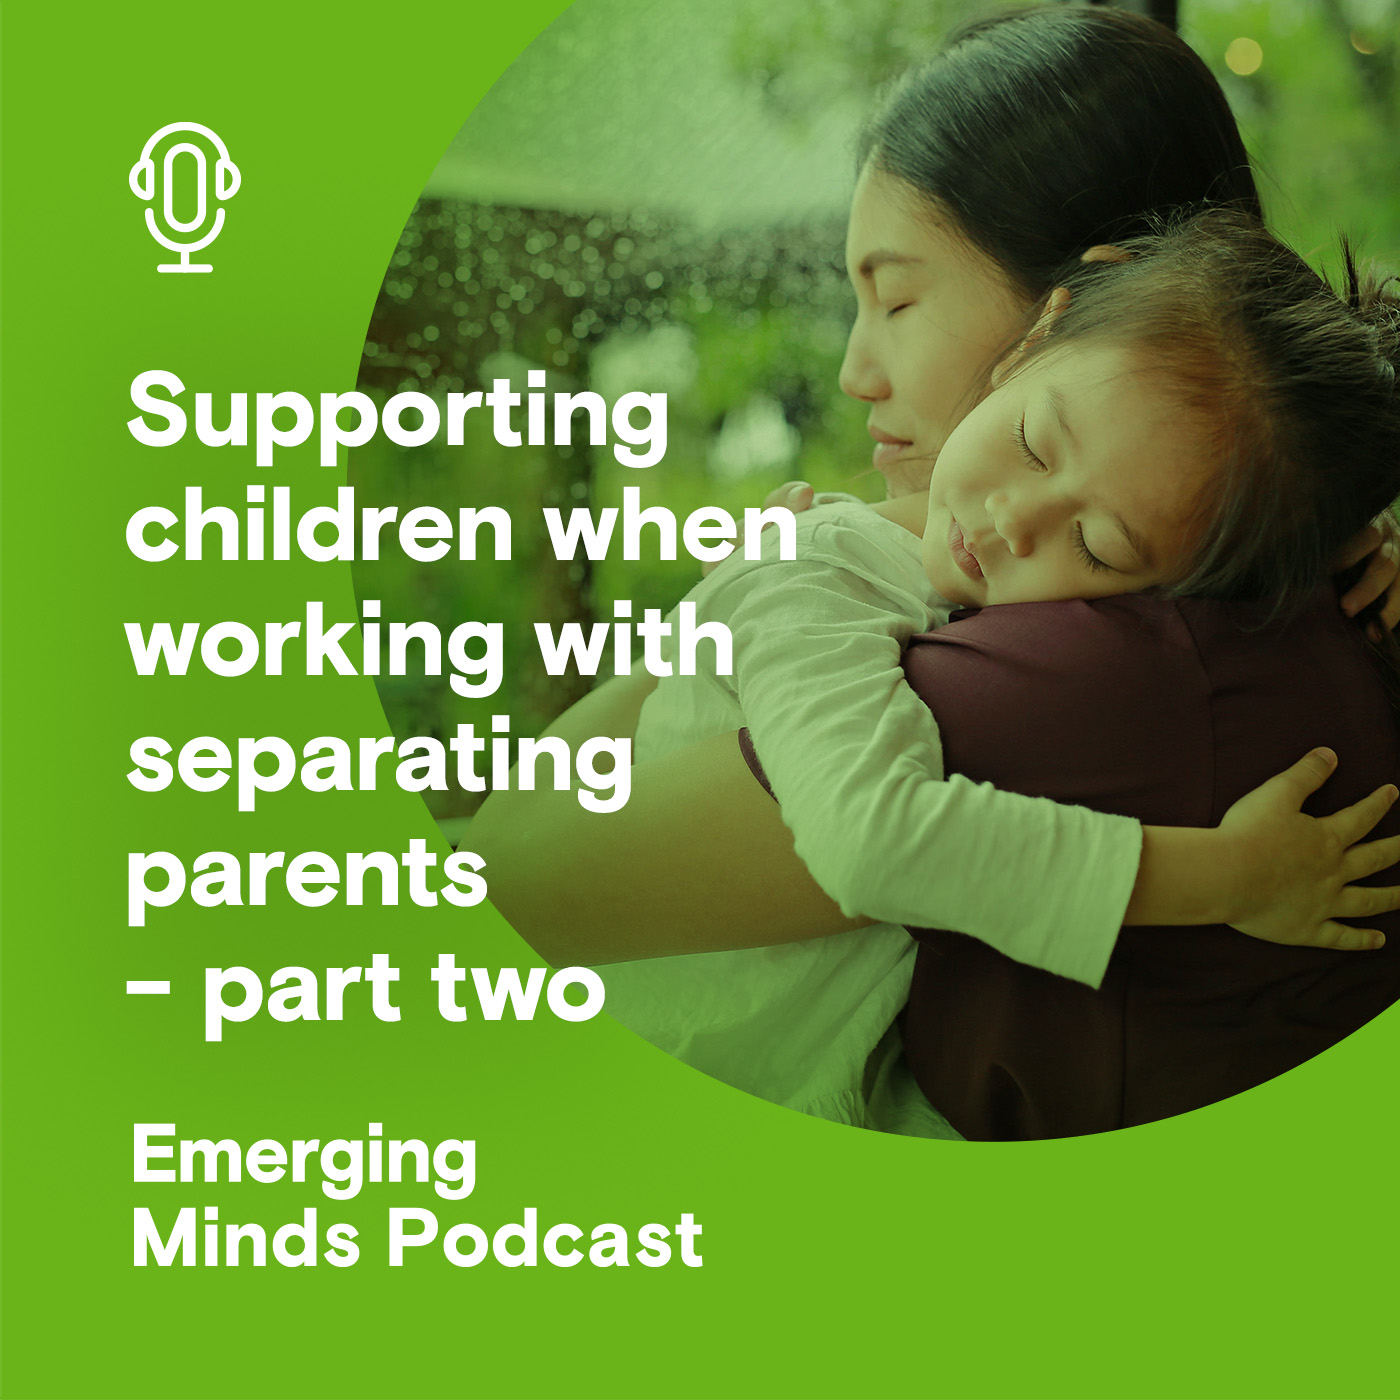 Supporting children when working with separating parents - part two